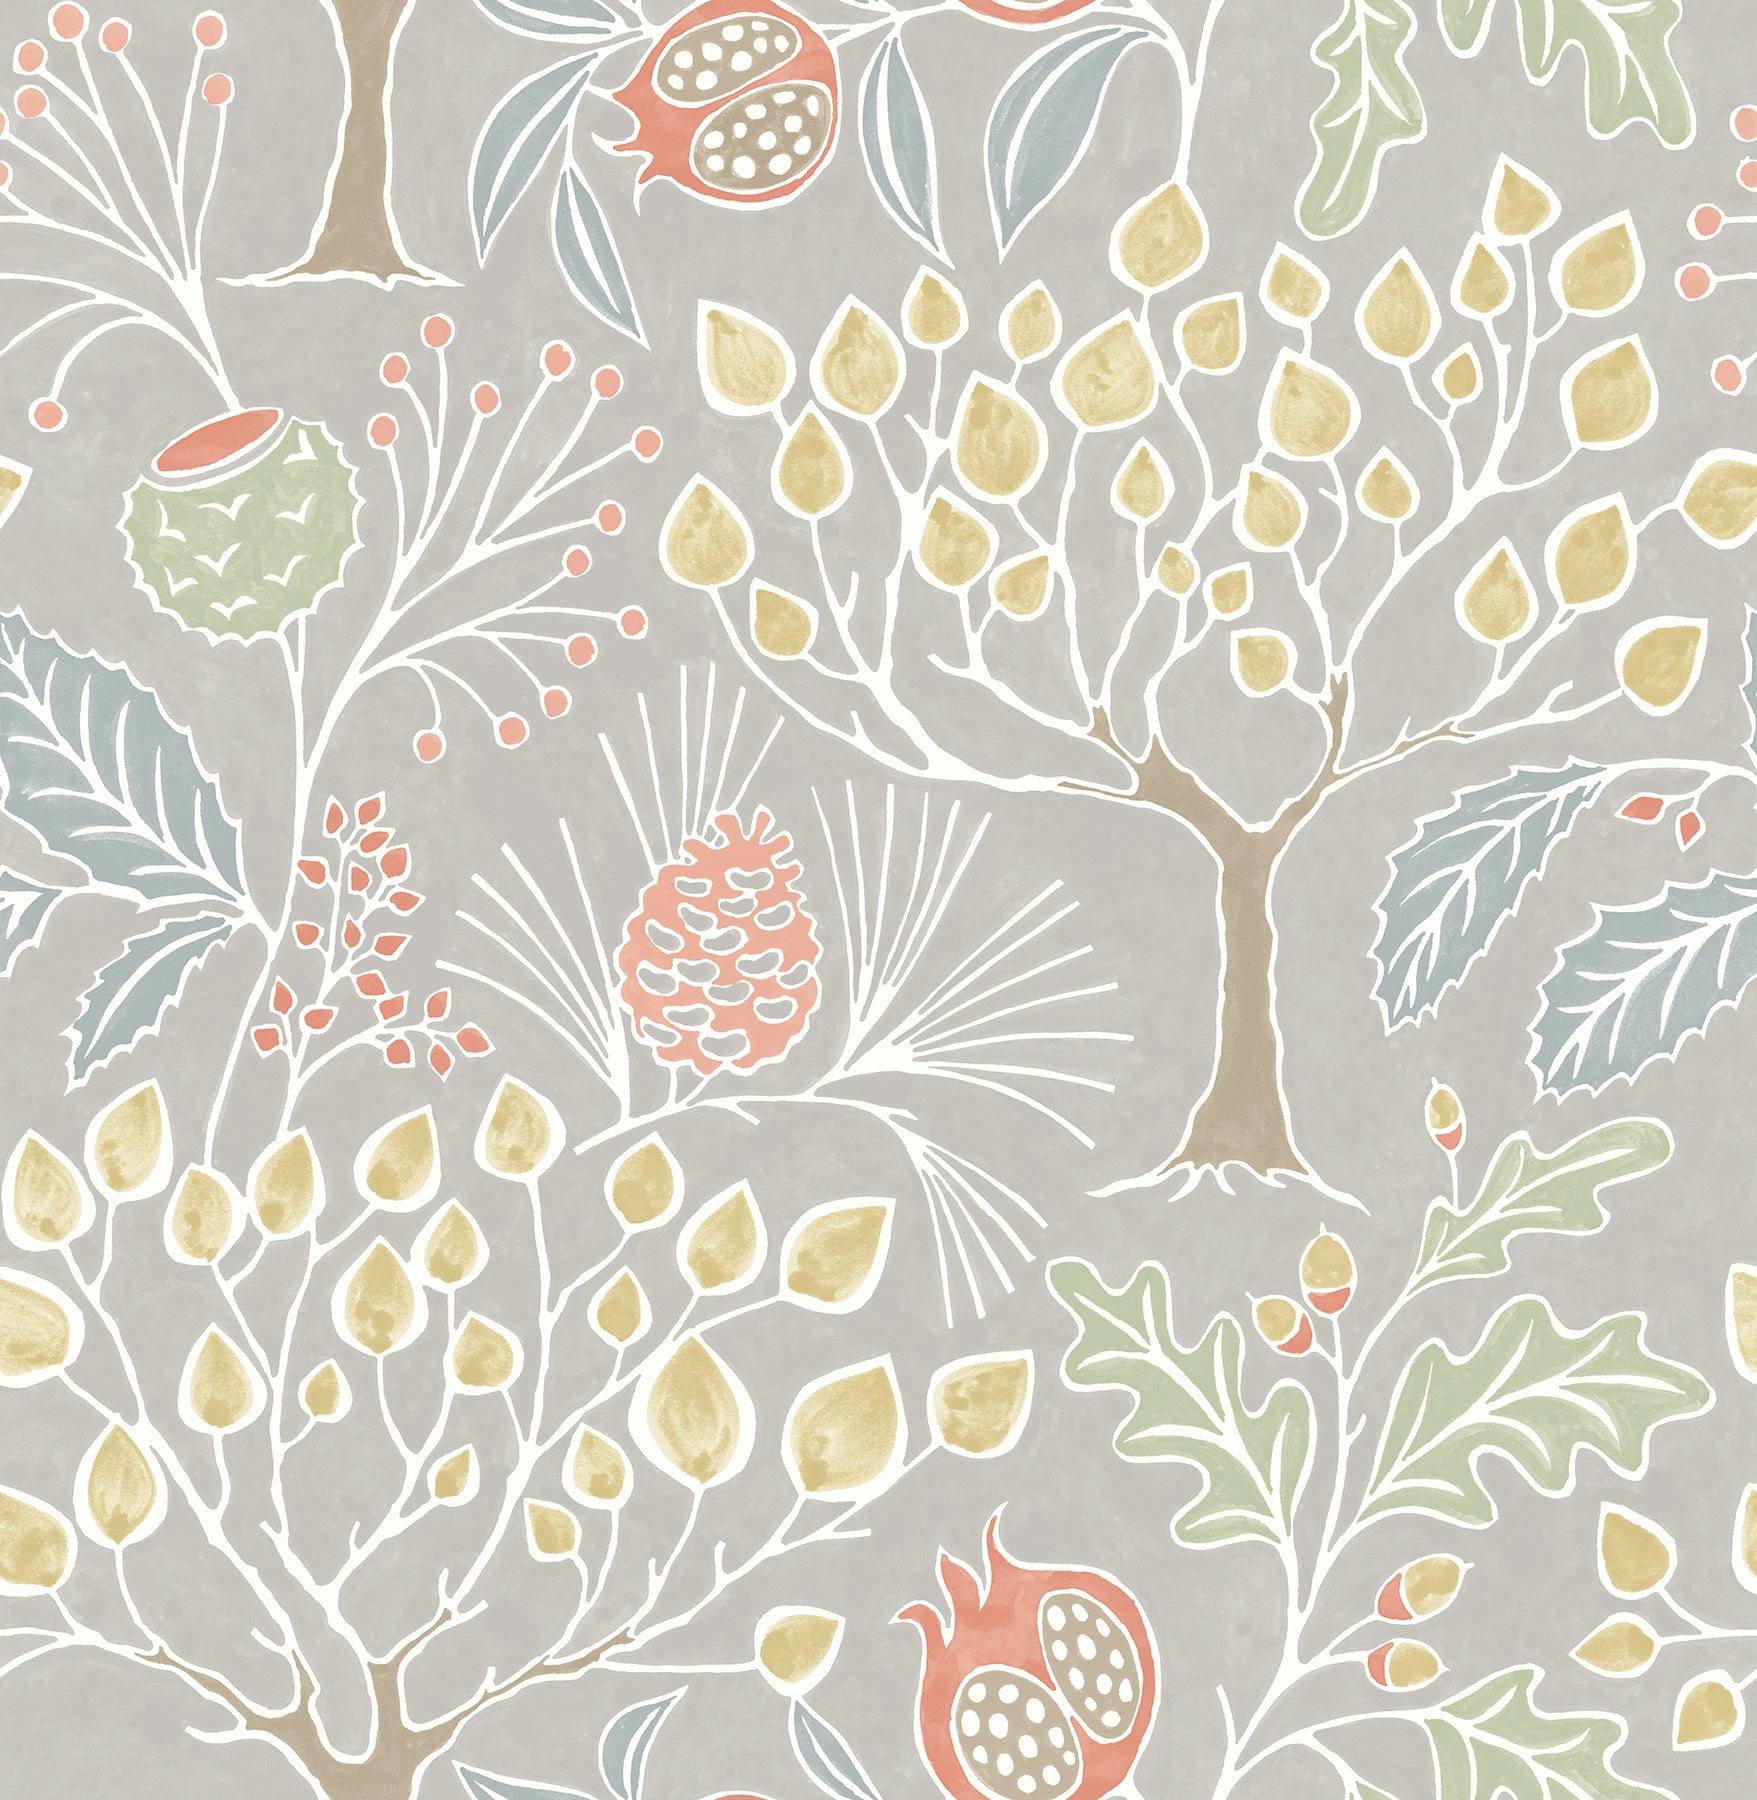 Looking for 2903-25829 Blue Bell Shiloh Light Grey Botanical A Street Prints Wallpaper